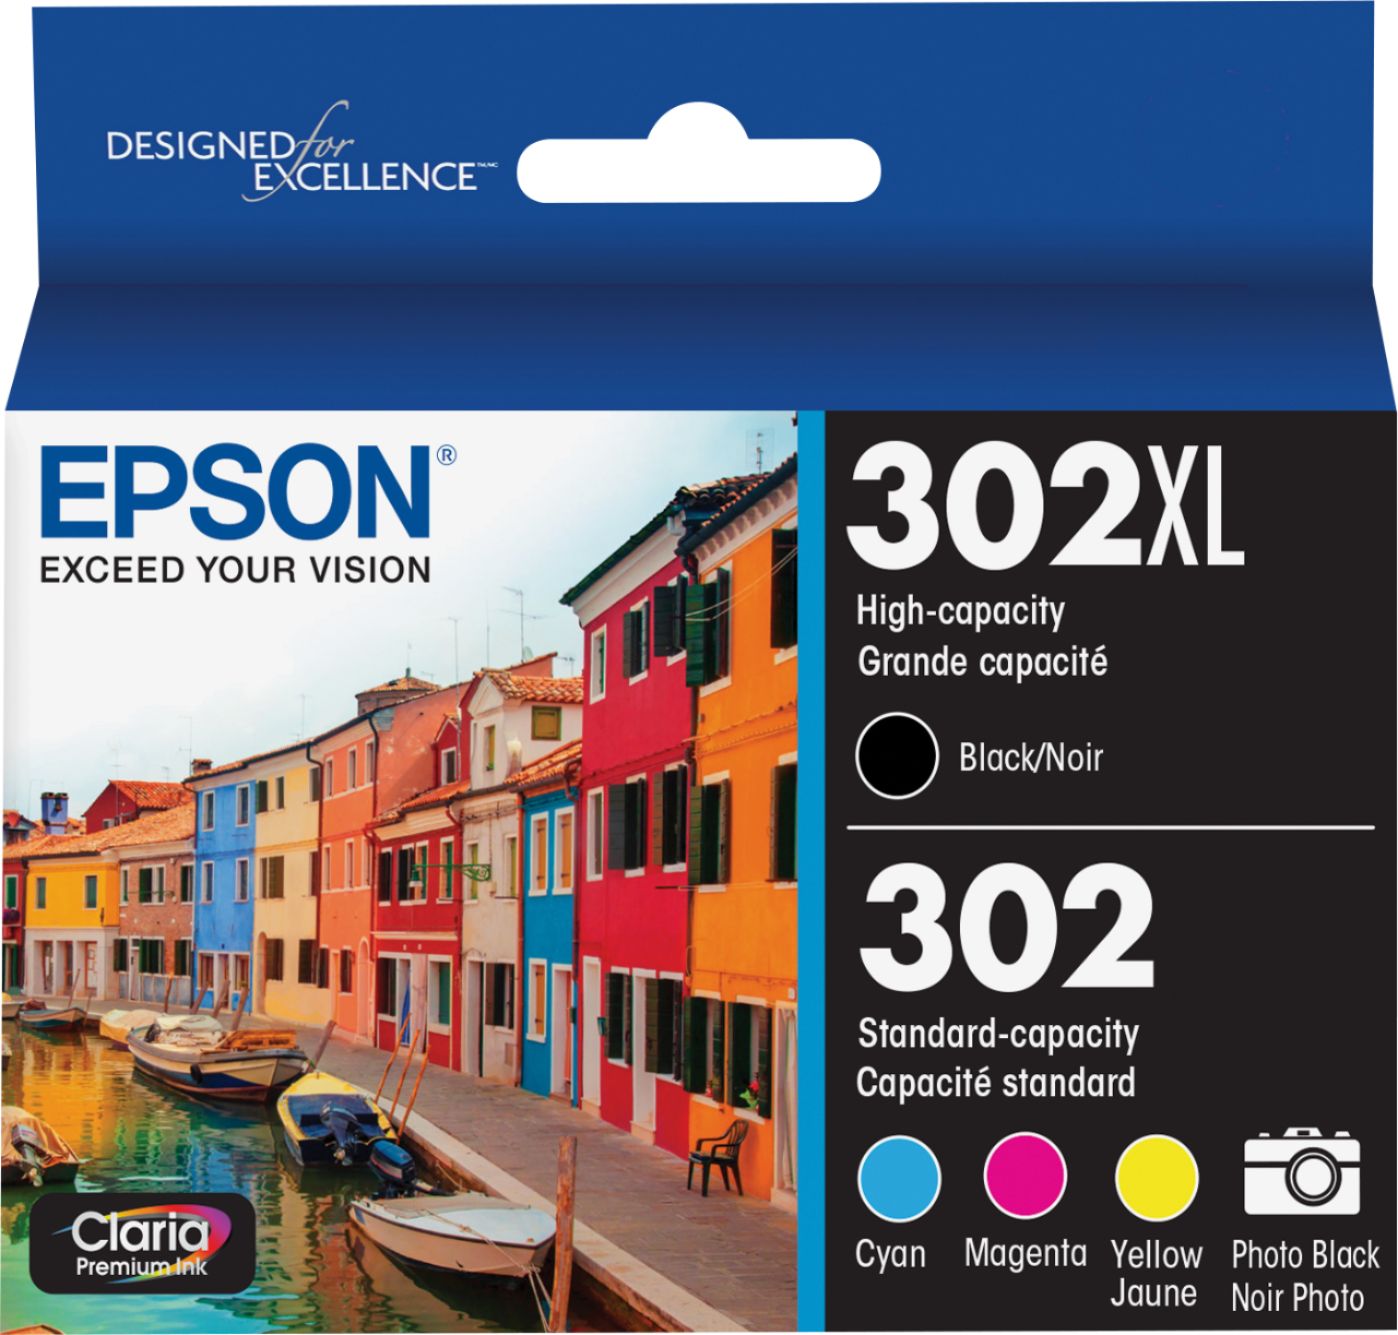 Epson 302 XL 4 Pack Compatible Replacement for XP-6000 and XP-6100